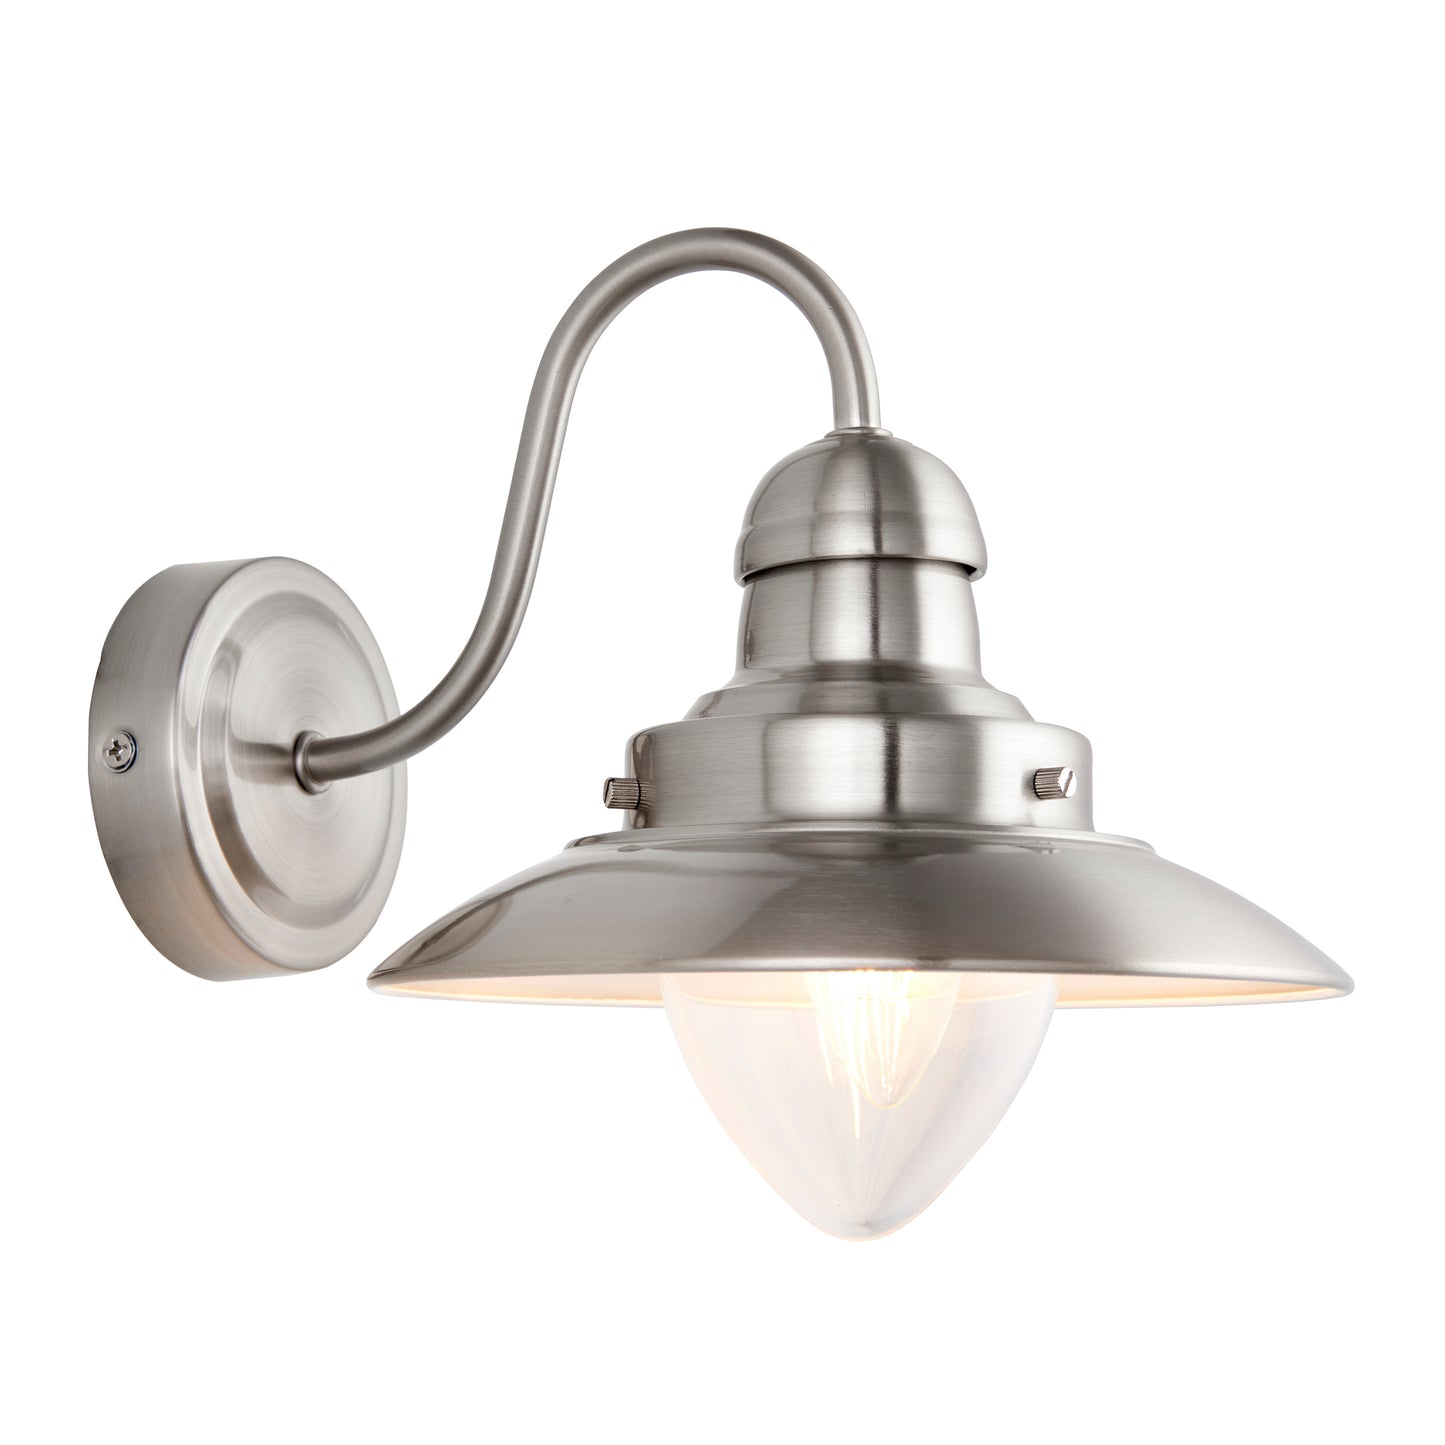 A Mendip Wall Light with a glass shade, perfect for home decor.